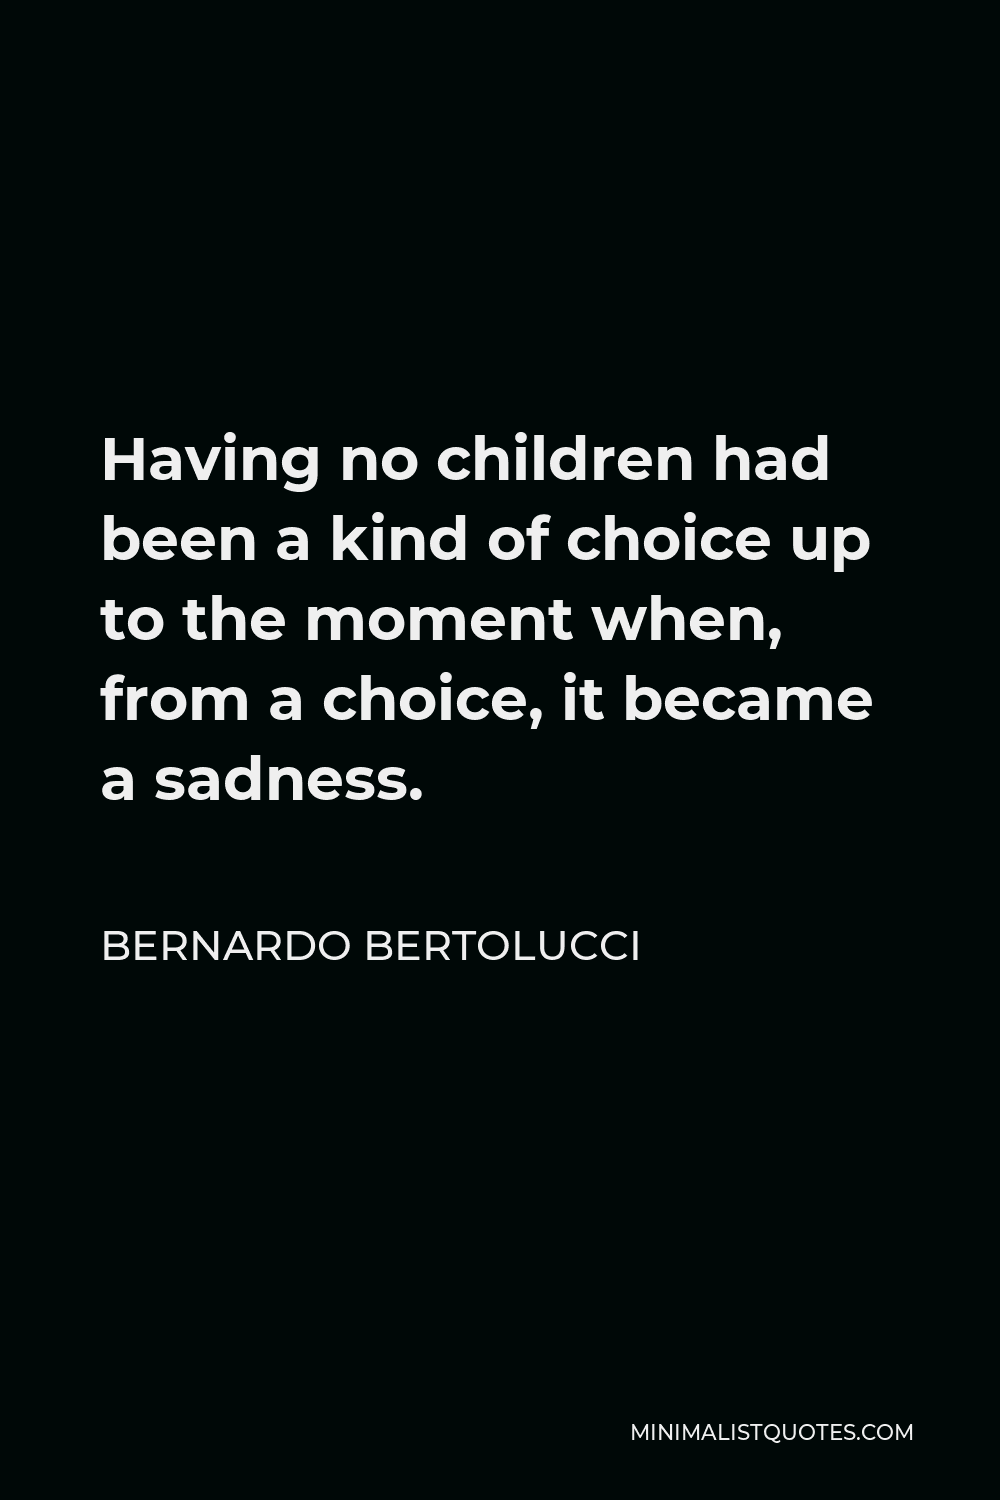 Bernardo Bertolucci Quote - Having no children had been a kind of choice up to the moment when, from a choice, it became a sadness.